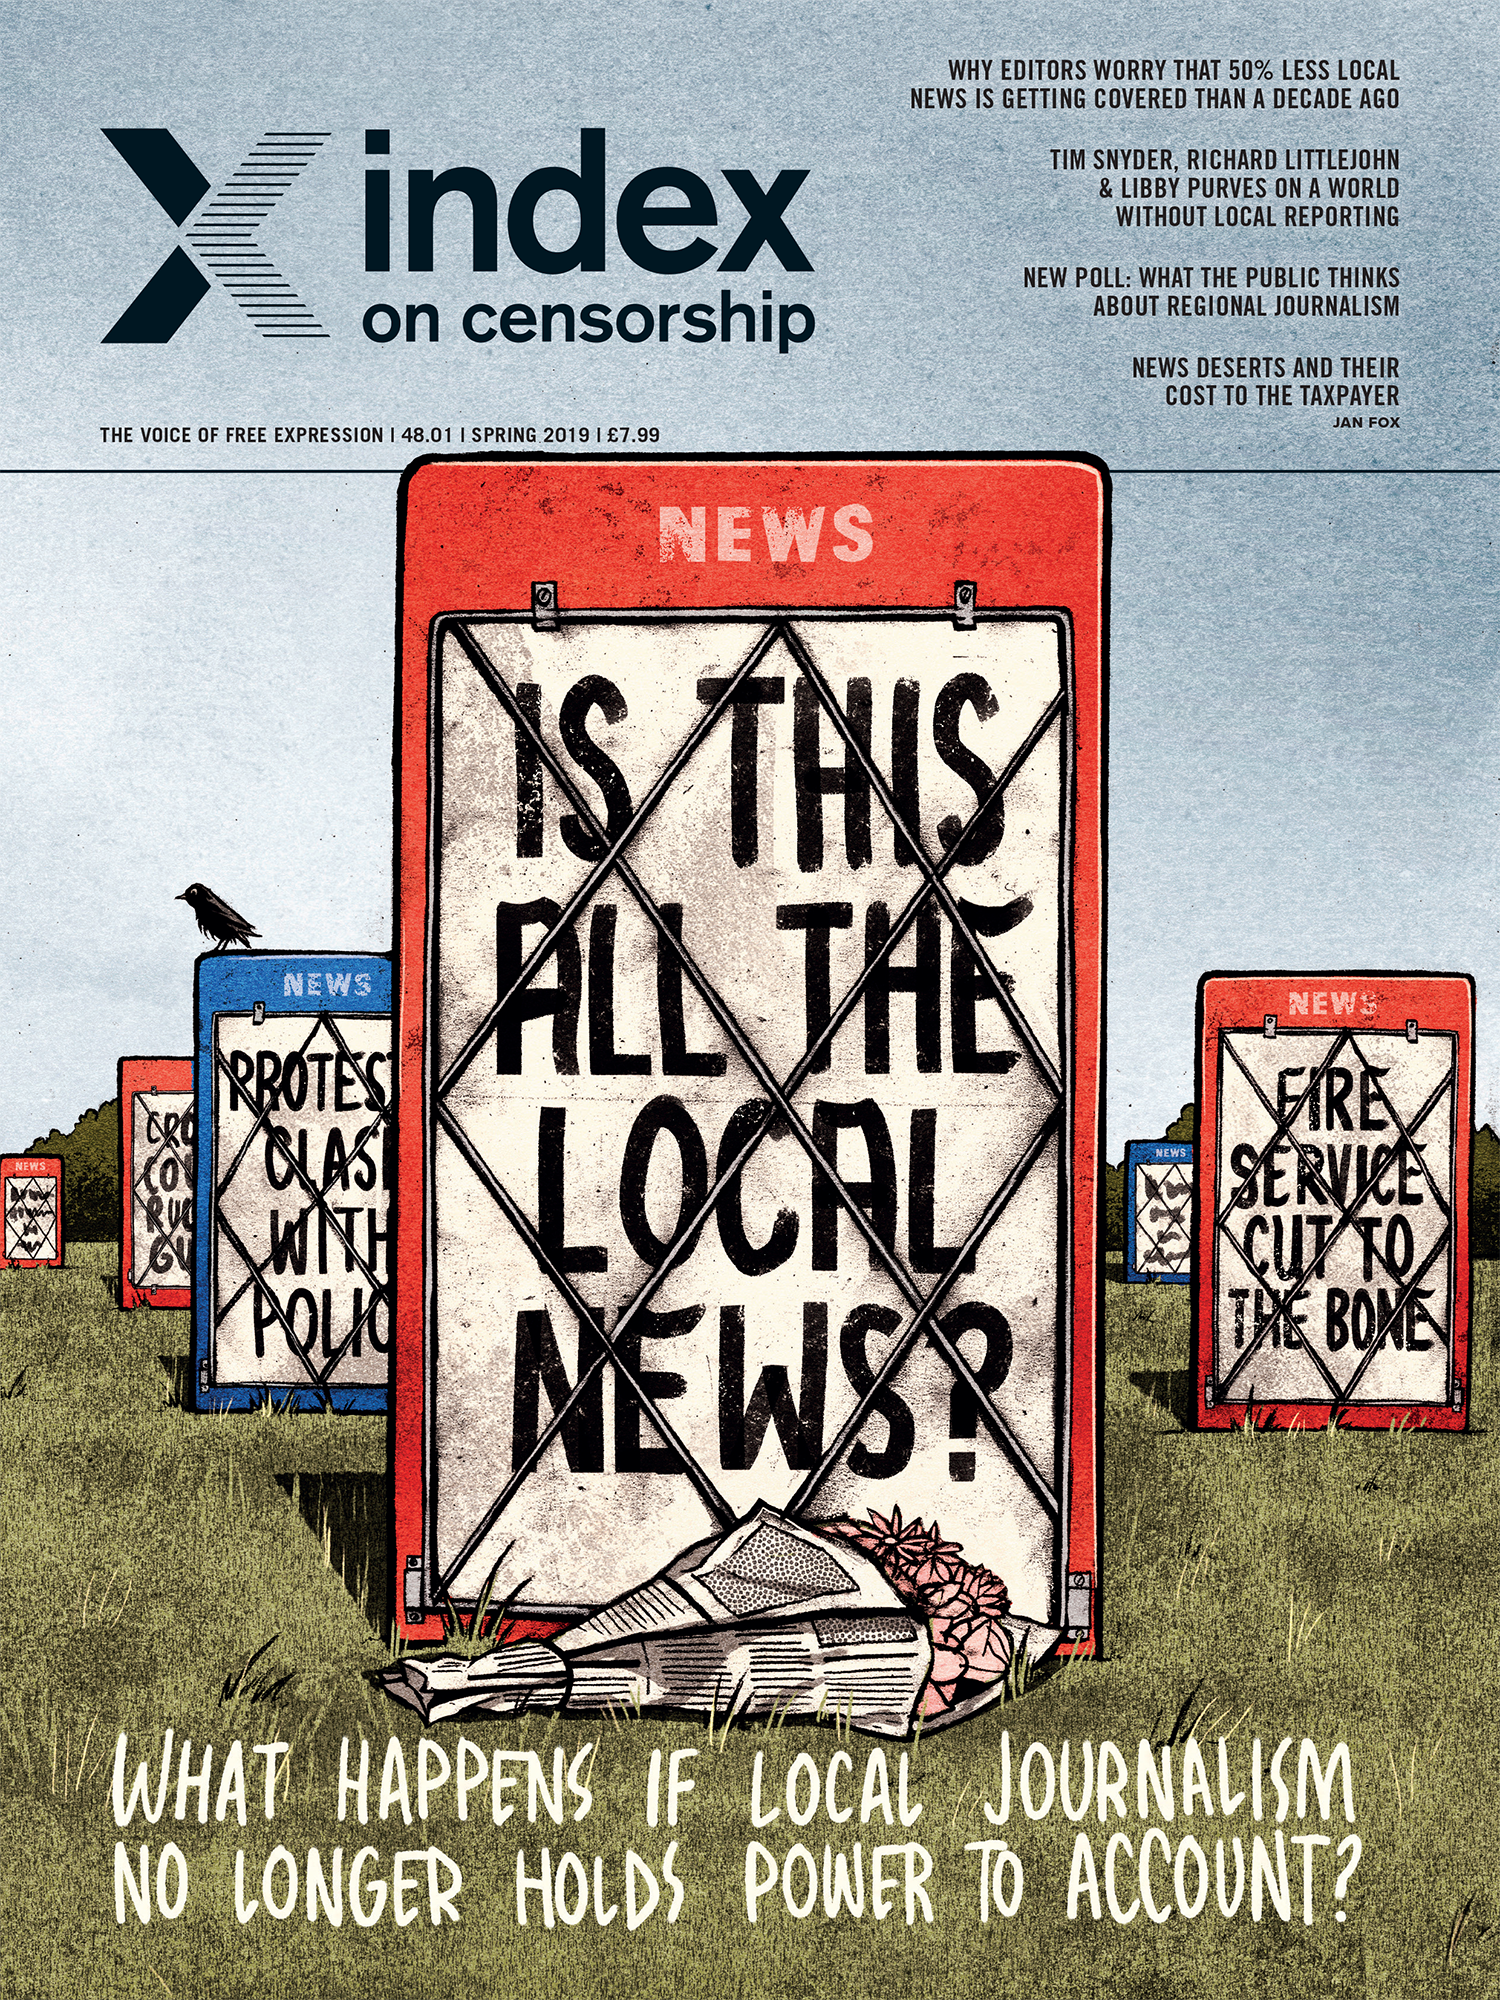 Majority of editors worry that local newspapers do not have the resources to hold the powerful to account in the way they did in the past, says new report